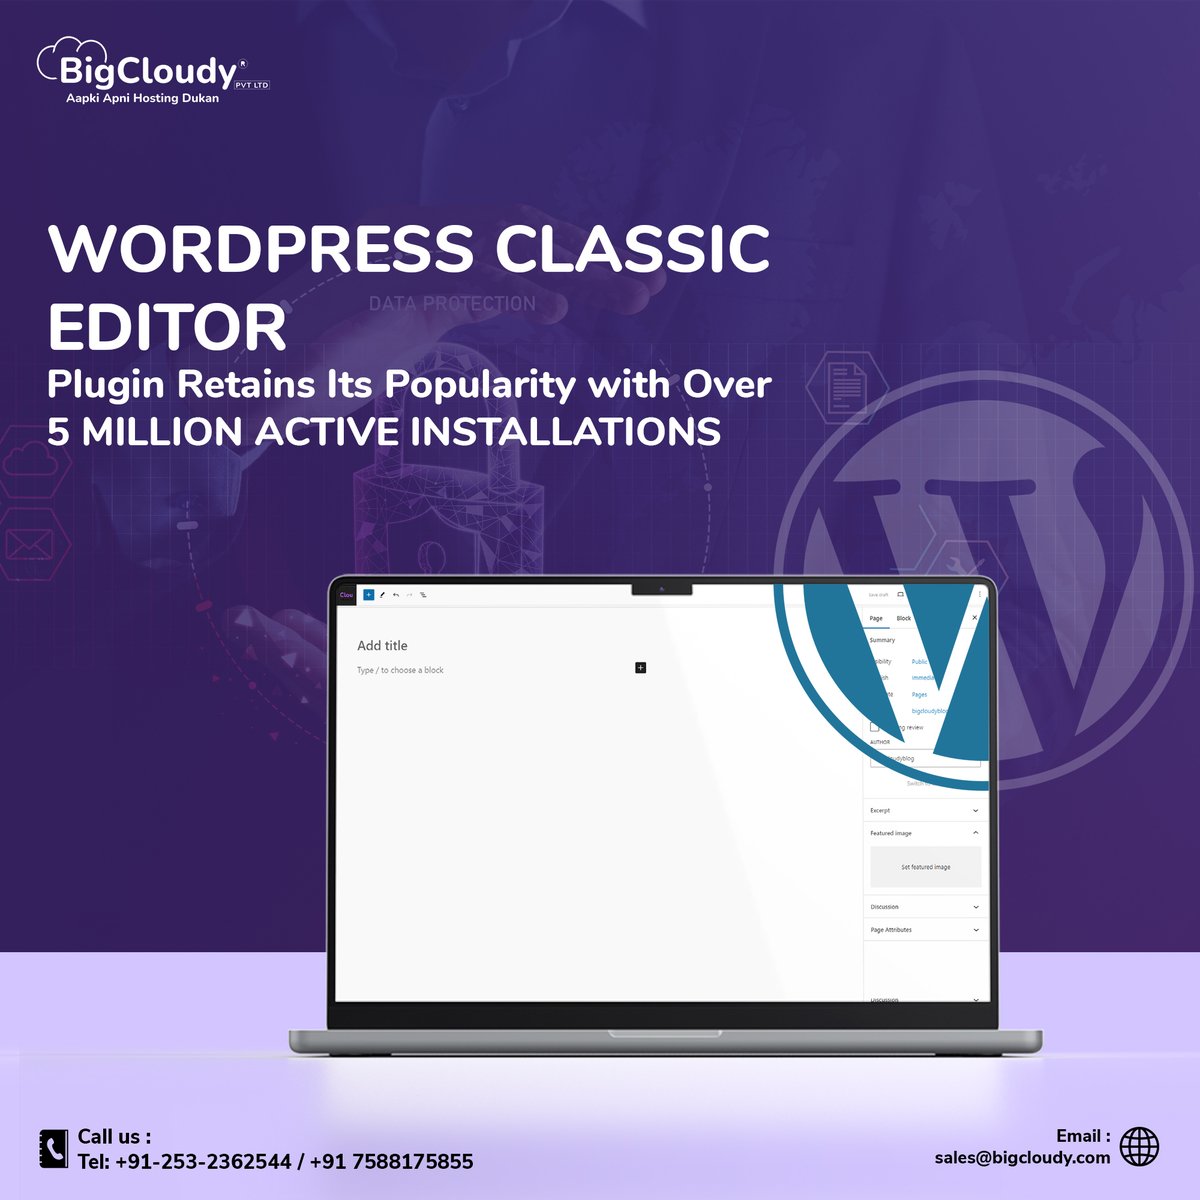 It's #WordPressWednesday! ⭐

Calling 🌐 all #WordPress users! 👨🏻‍💻 Did you know 🤔
the Classic Editor plugin still has over 5 million 🤩
active installations? ⬇️

#wordpresshosting #wordpressplugin #classiceditor #facts #technolgy #Website  #BigCloudy #WebHosting